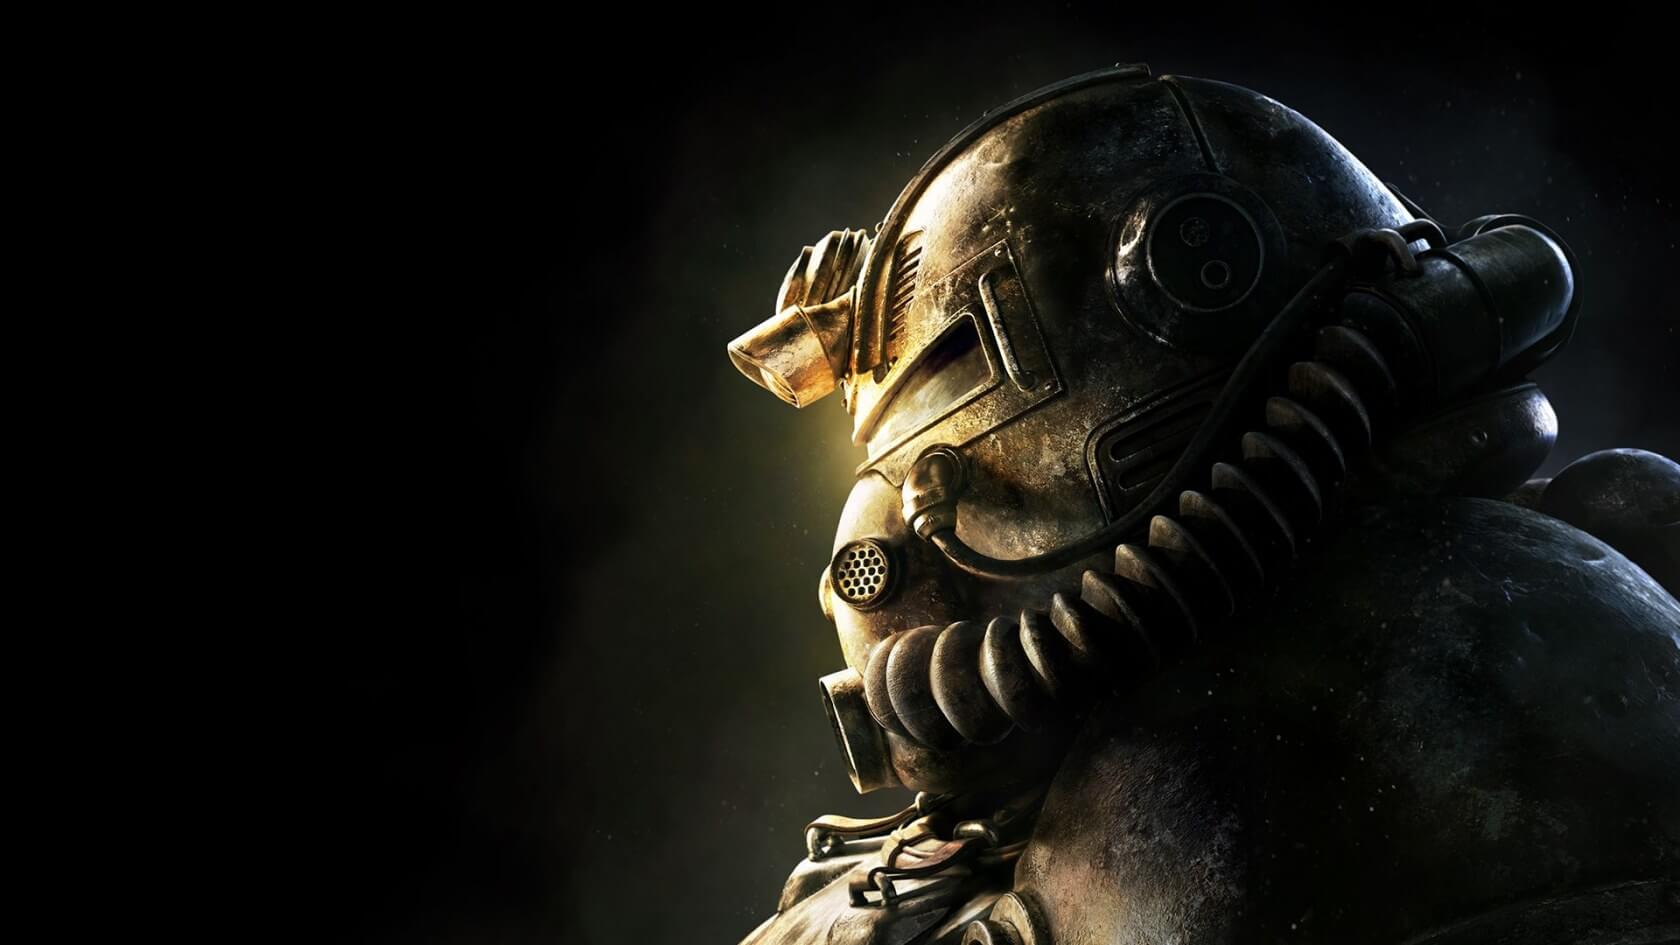 Bethesda confirms that Fallout 76 won't support cross-play